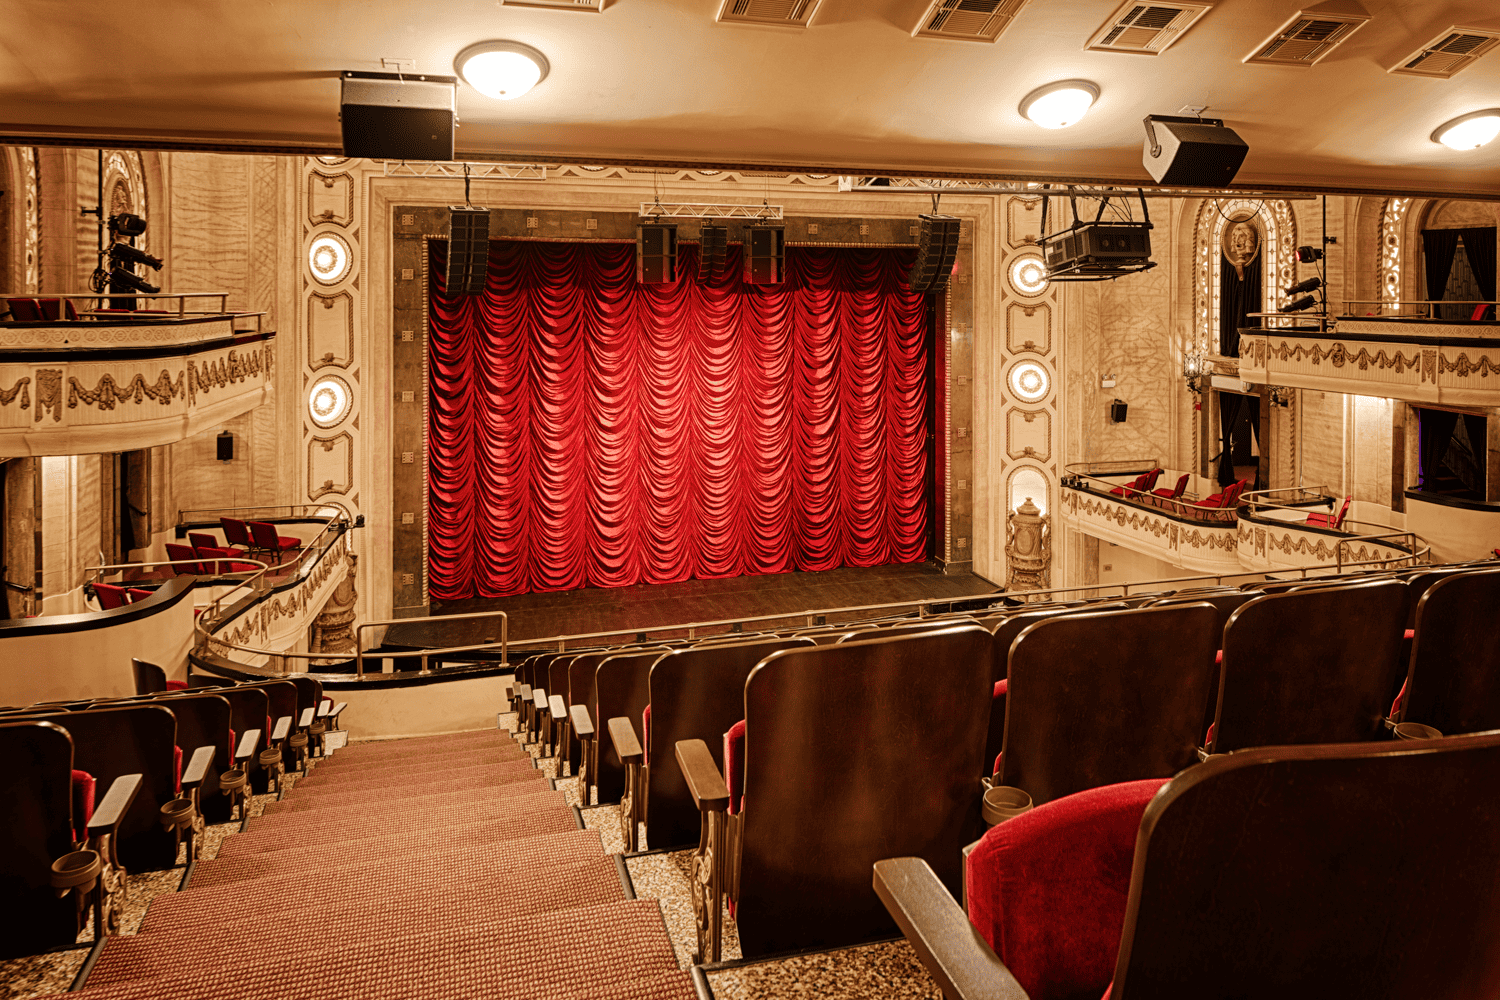 Image Description: The Studebaker Theater, viewed from the balcony.